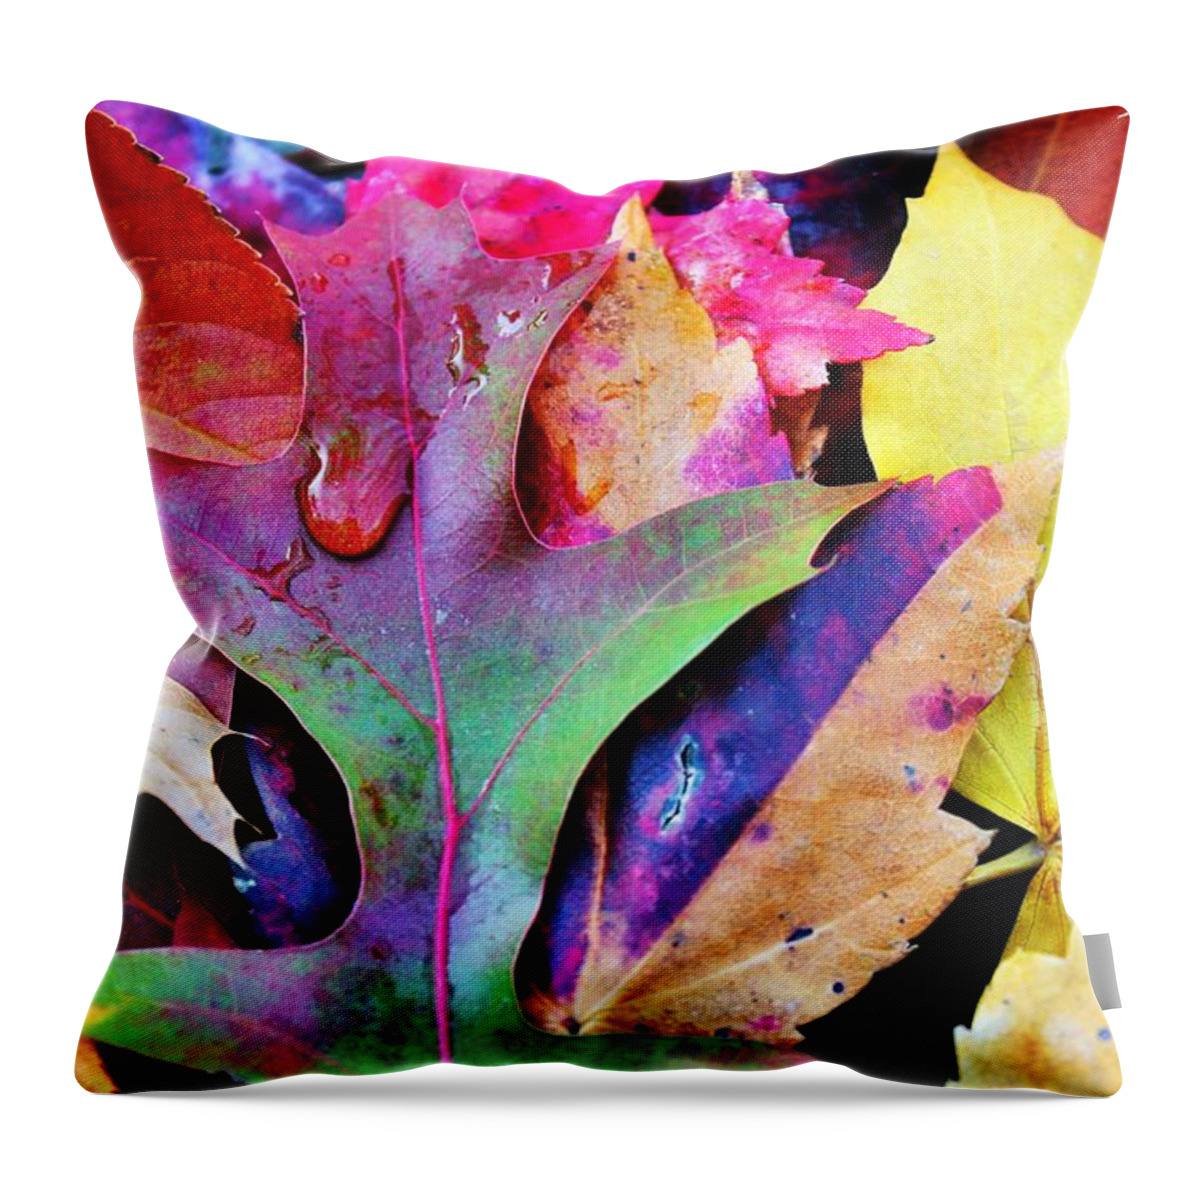 Autumn Throw Pillow featuring the photograph Primary Colors Of Fall by Judy Palkimas